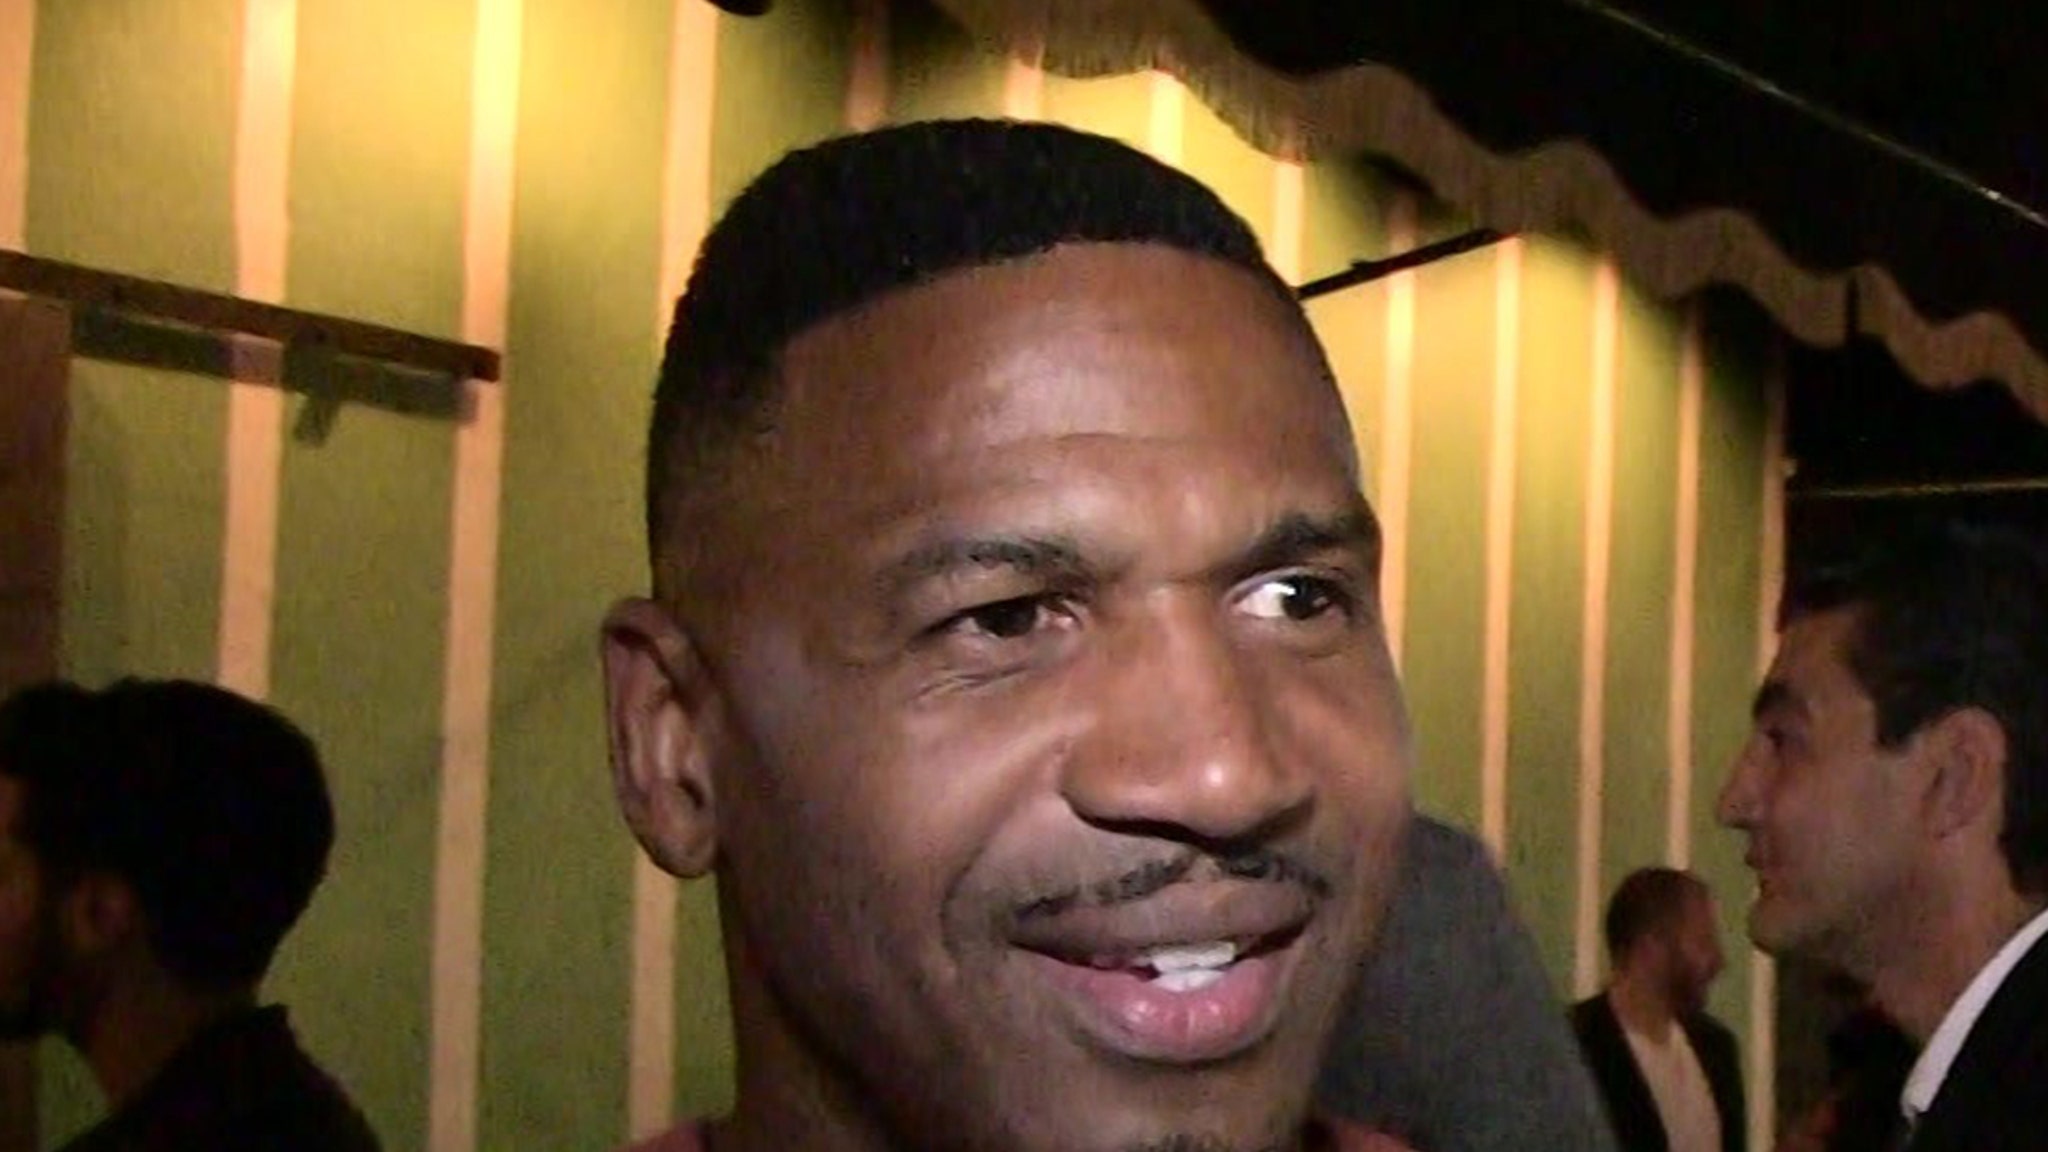 Stevie J Appears to Be Receiving Oral Sex During FaceTime Interview – TMZ